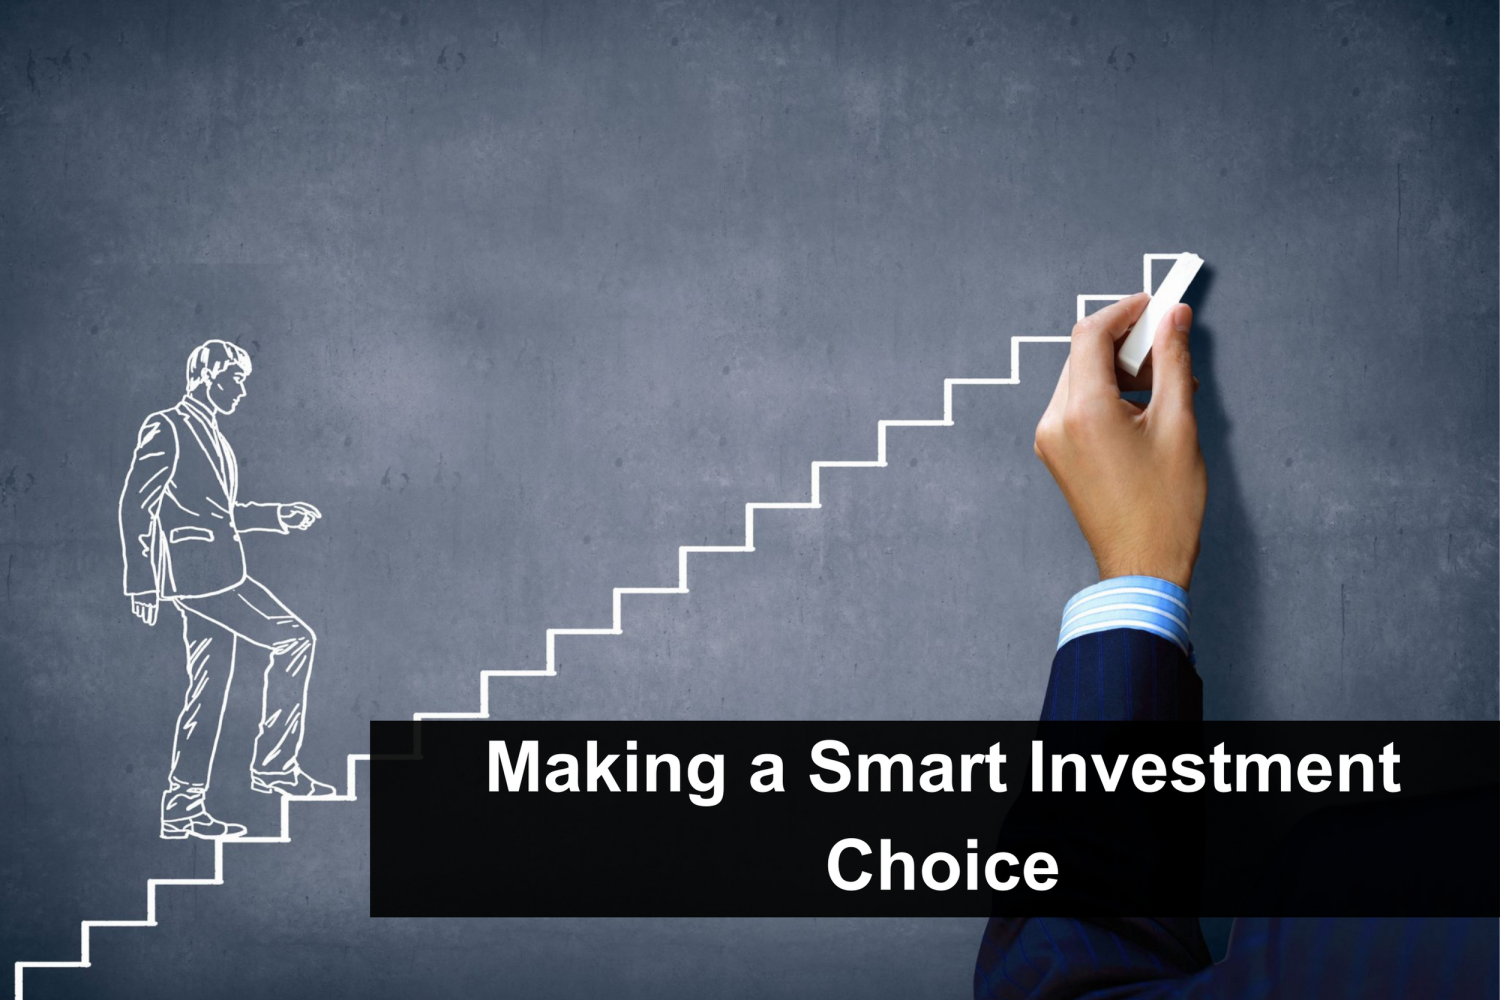 Making a Smart Investment Choice